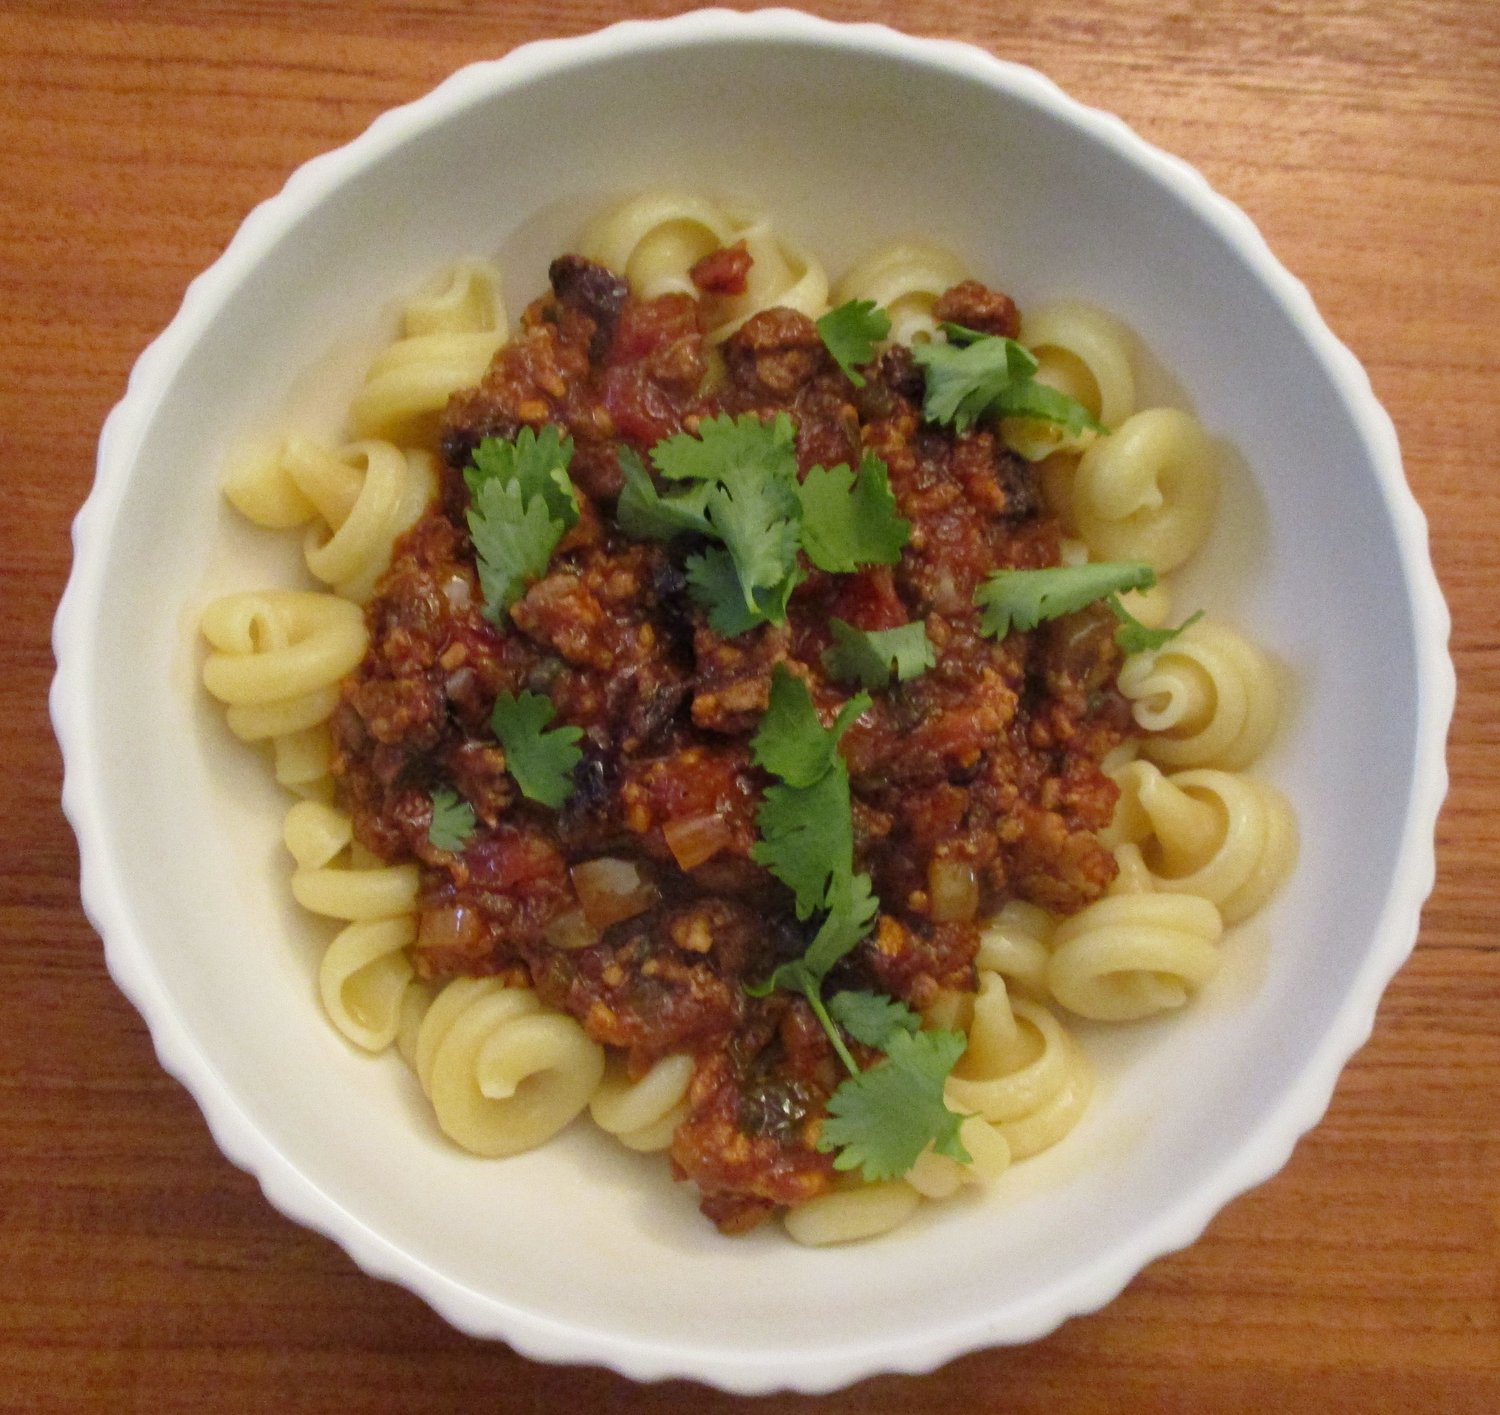 Picadillo, ground meat cooked in a delicious sweet-sour mix of flavors, is shown here over pasta.